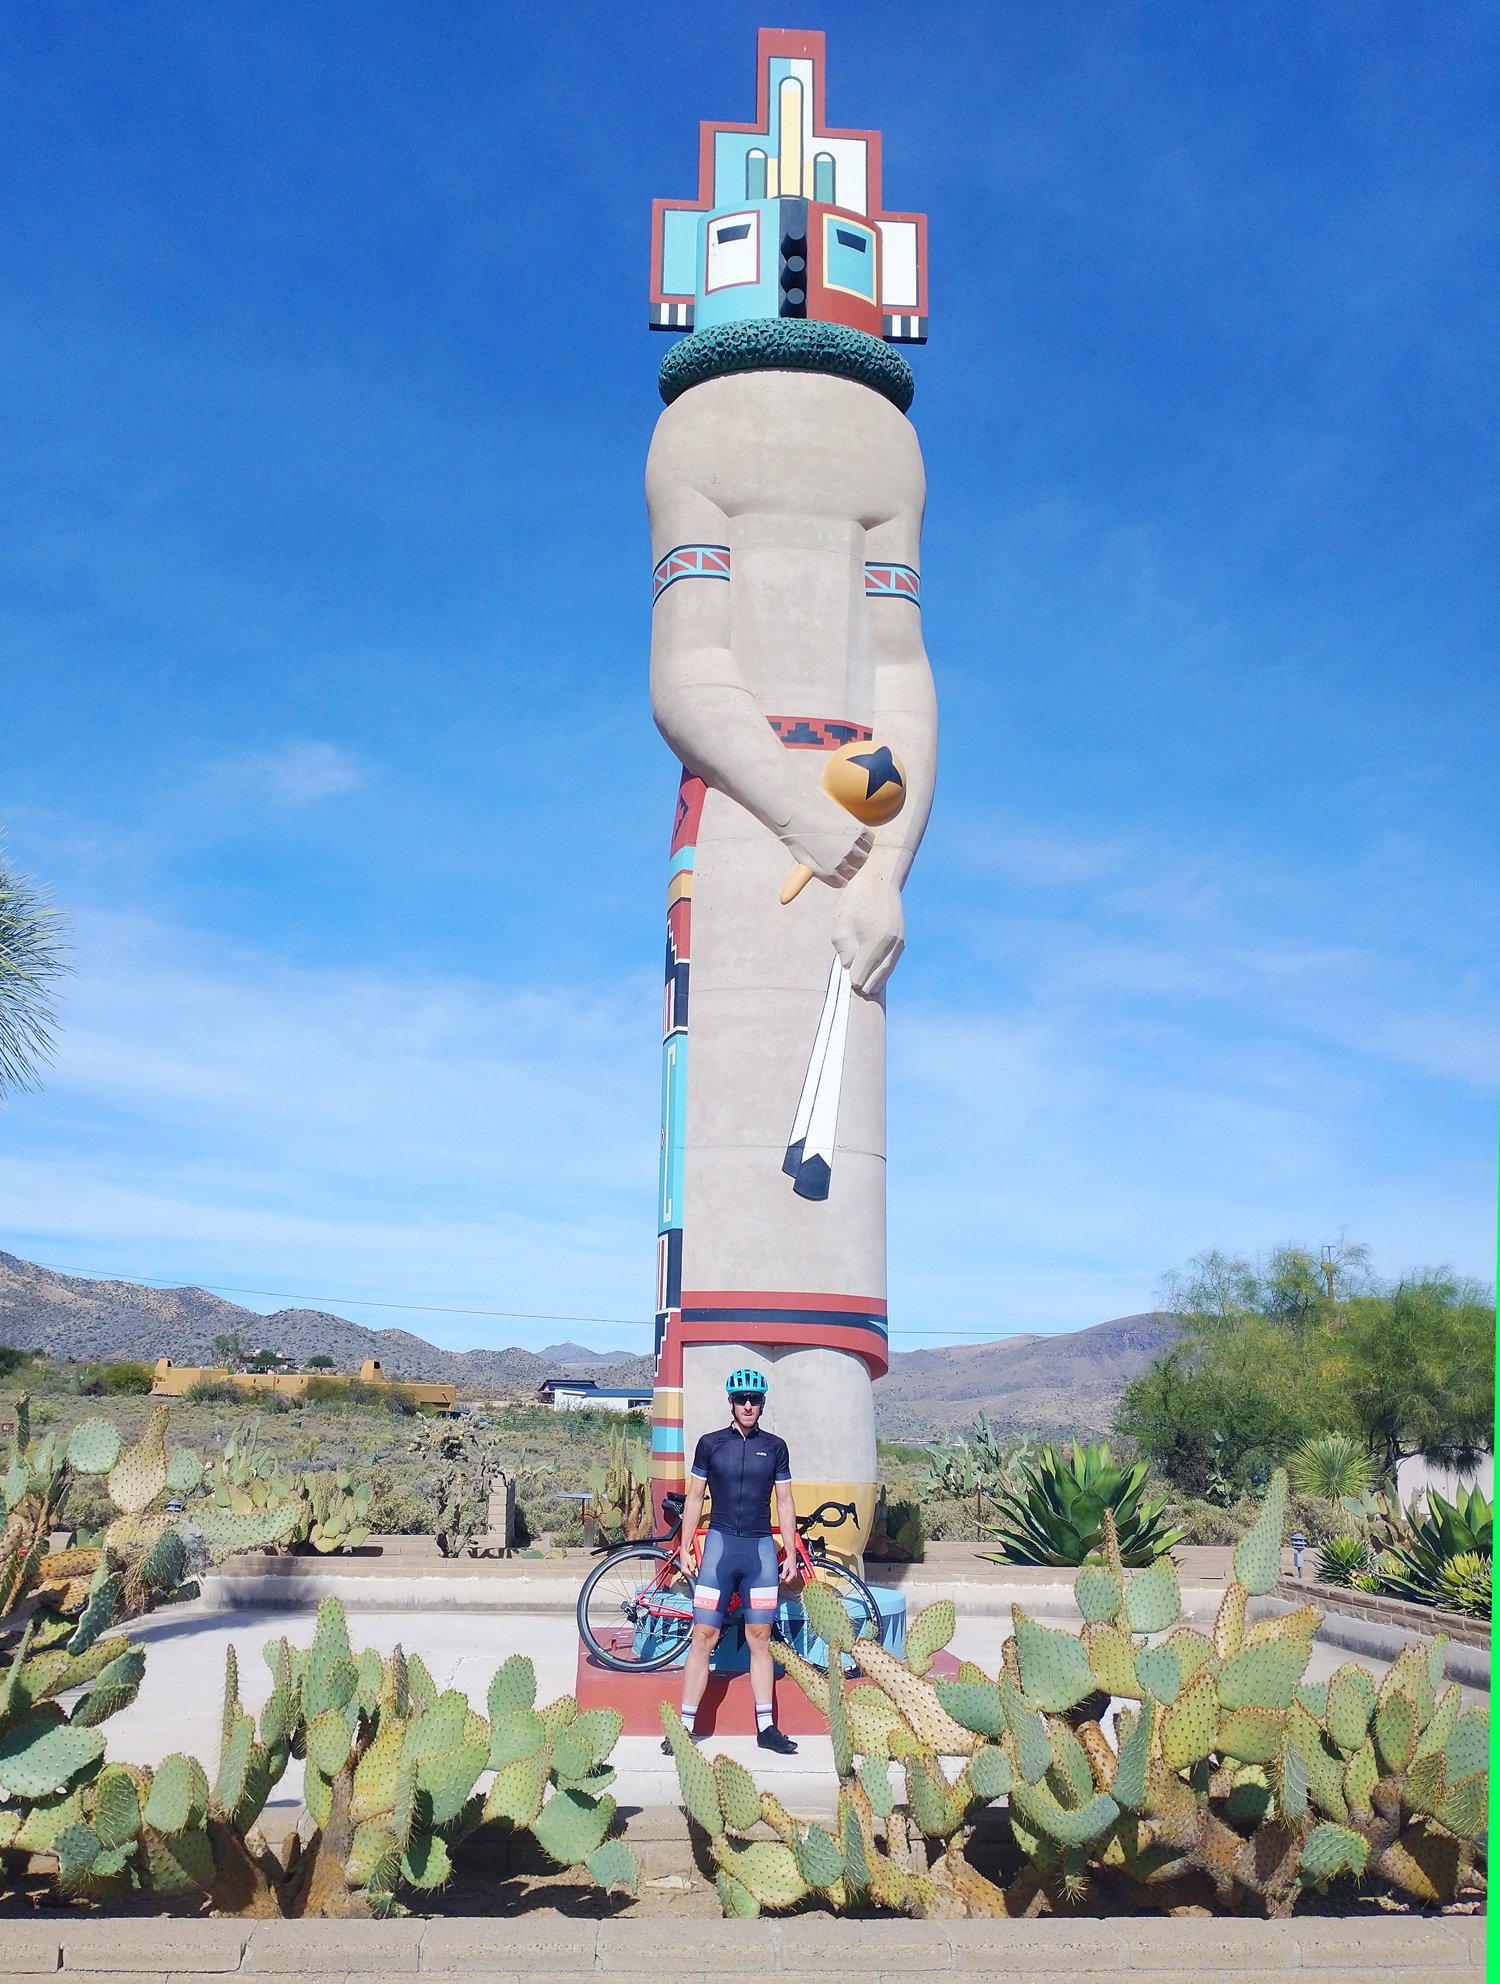 Largest Kachina doll. It's some.. mexican thing. Hidden behind a cactus moat.